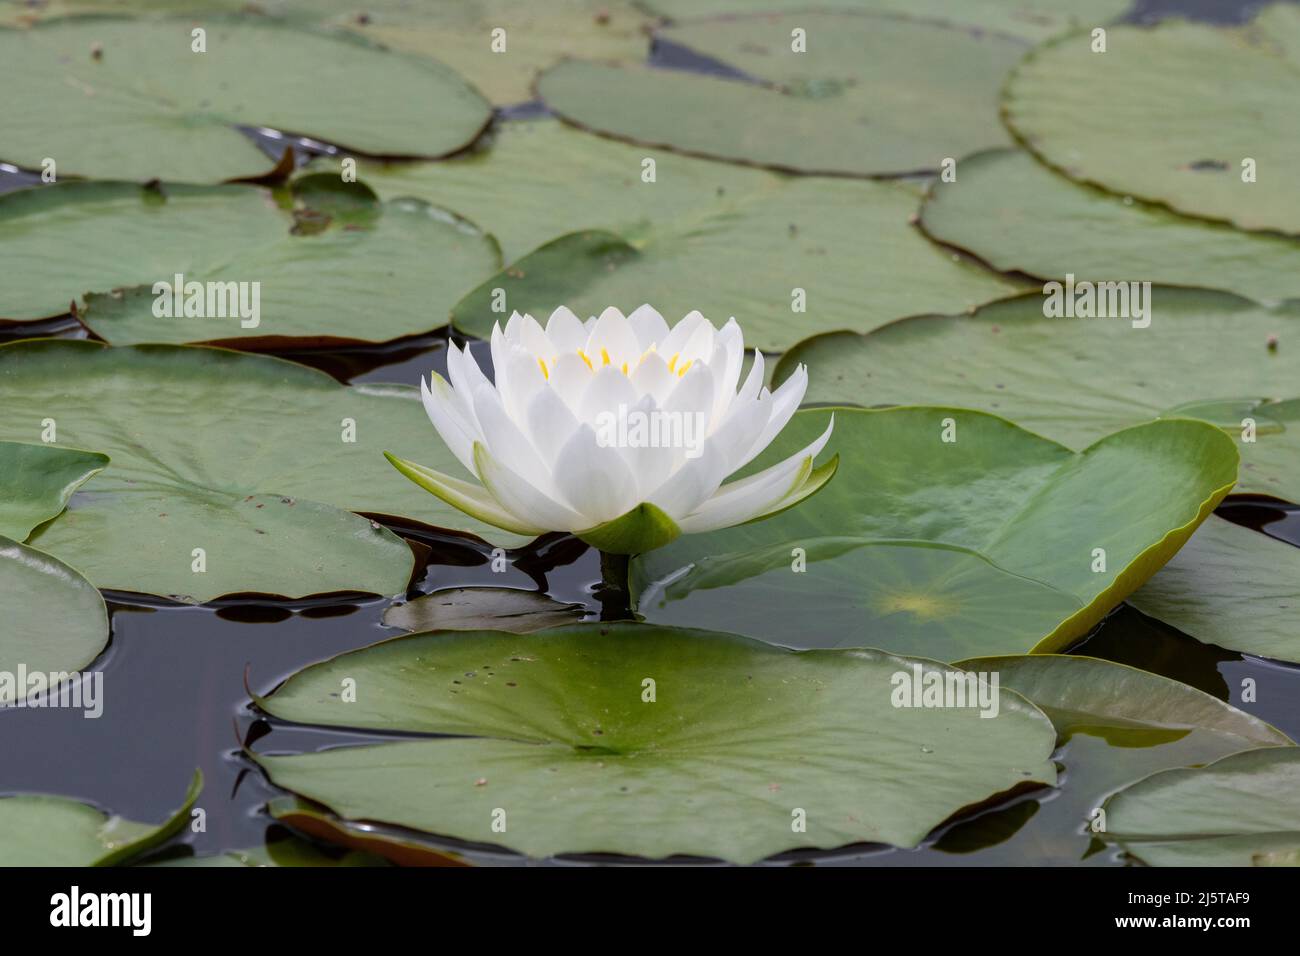 A beautiful white Water Lily flower extending out of a lily pad covered pond on a short green stem. Stock Photo